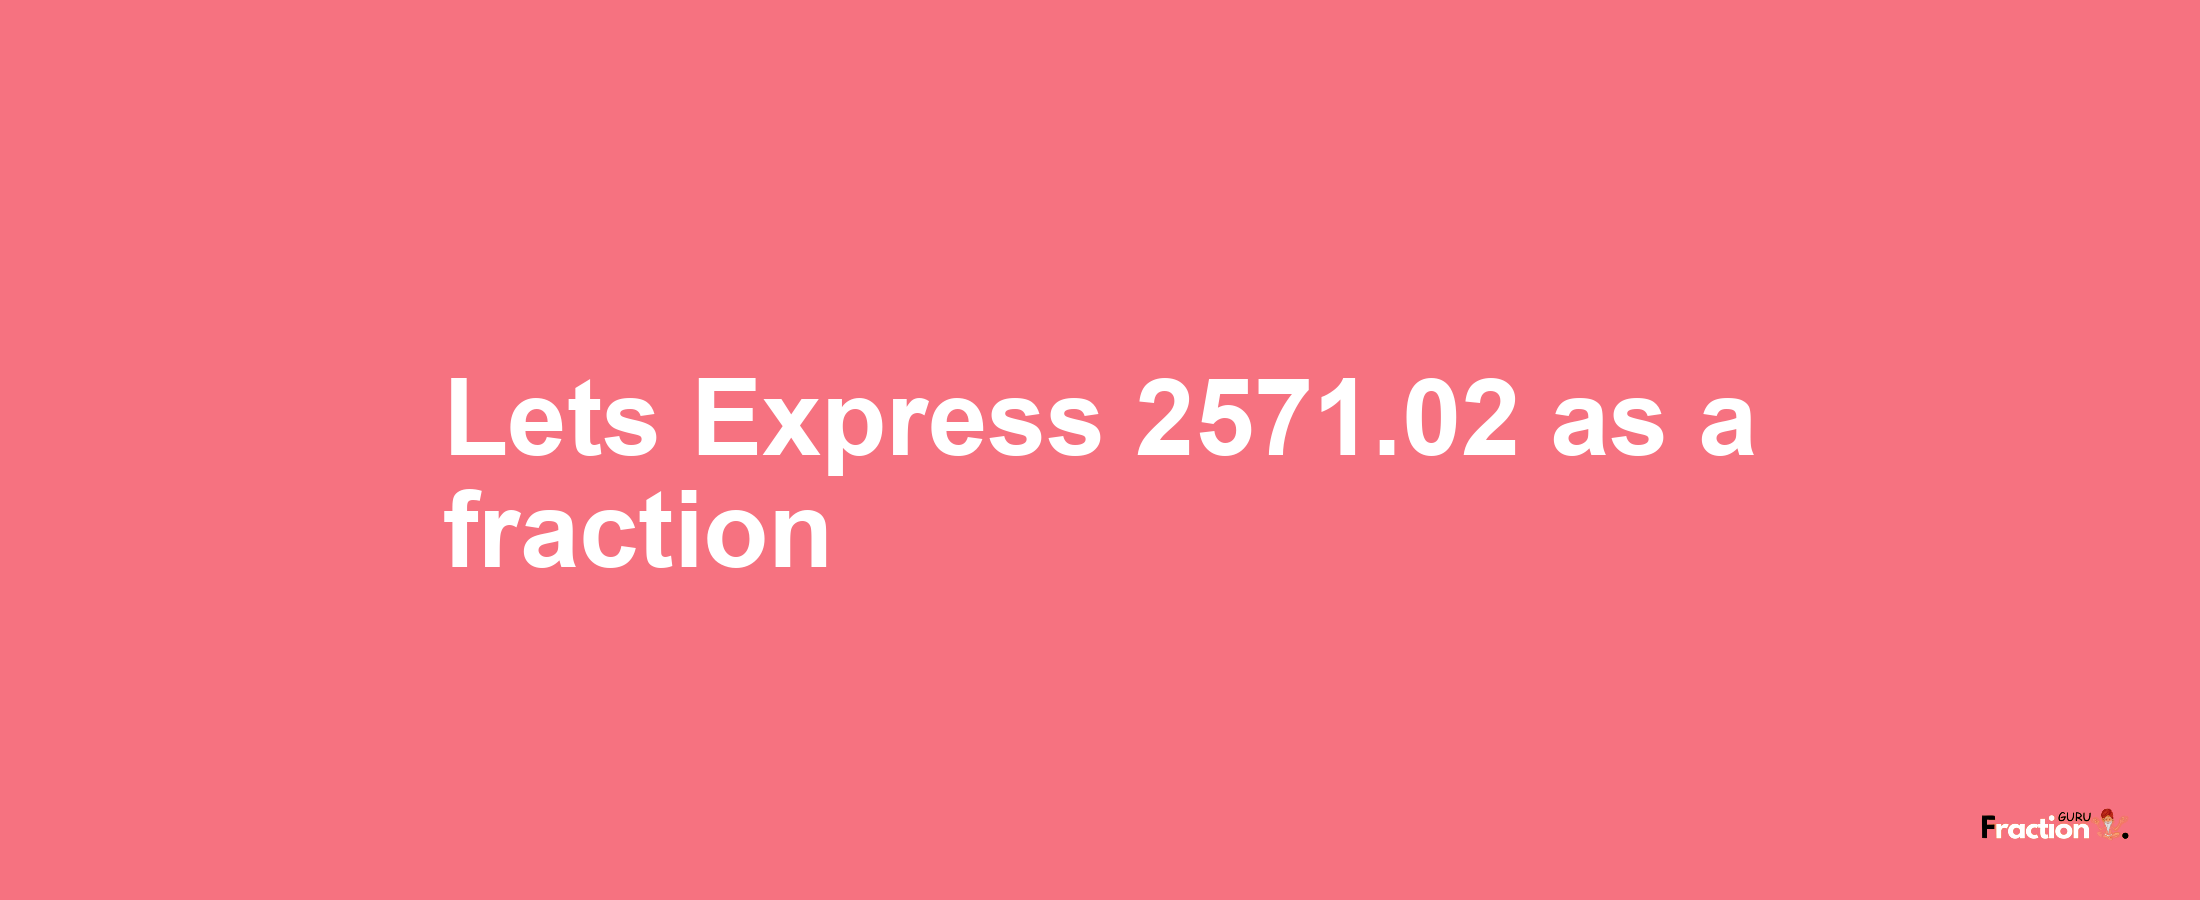 Lets Express 2571.02 as afraction